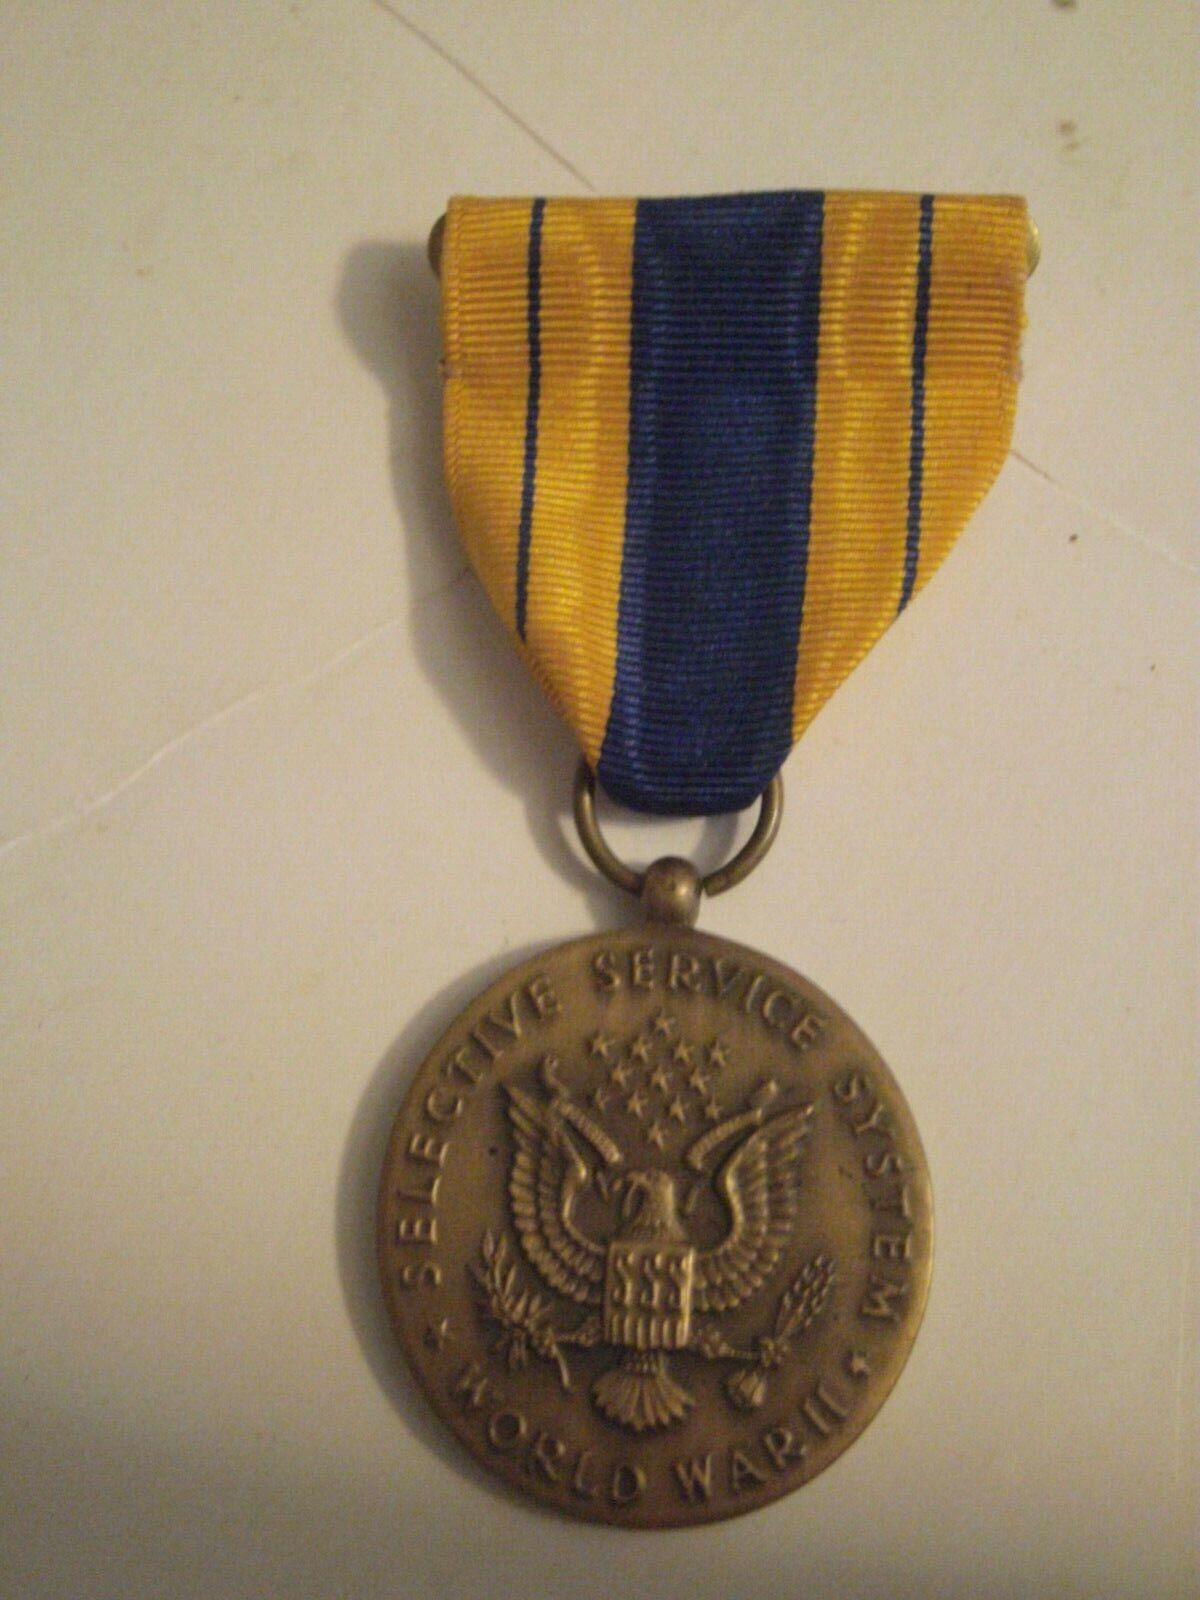  WWII Selective Service Medal with Slot Brooch